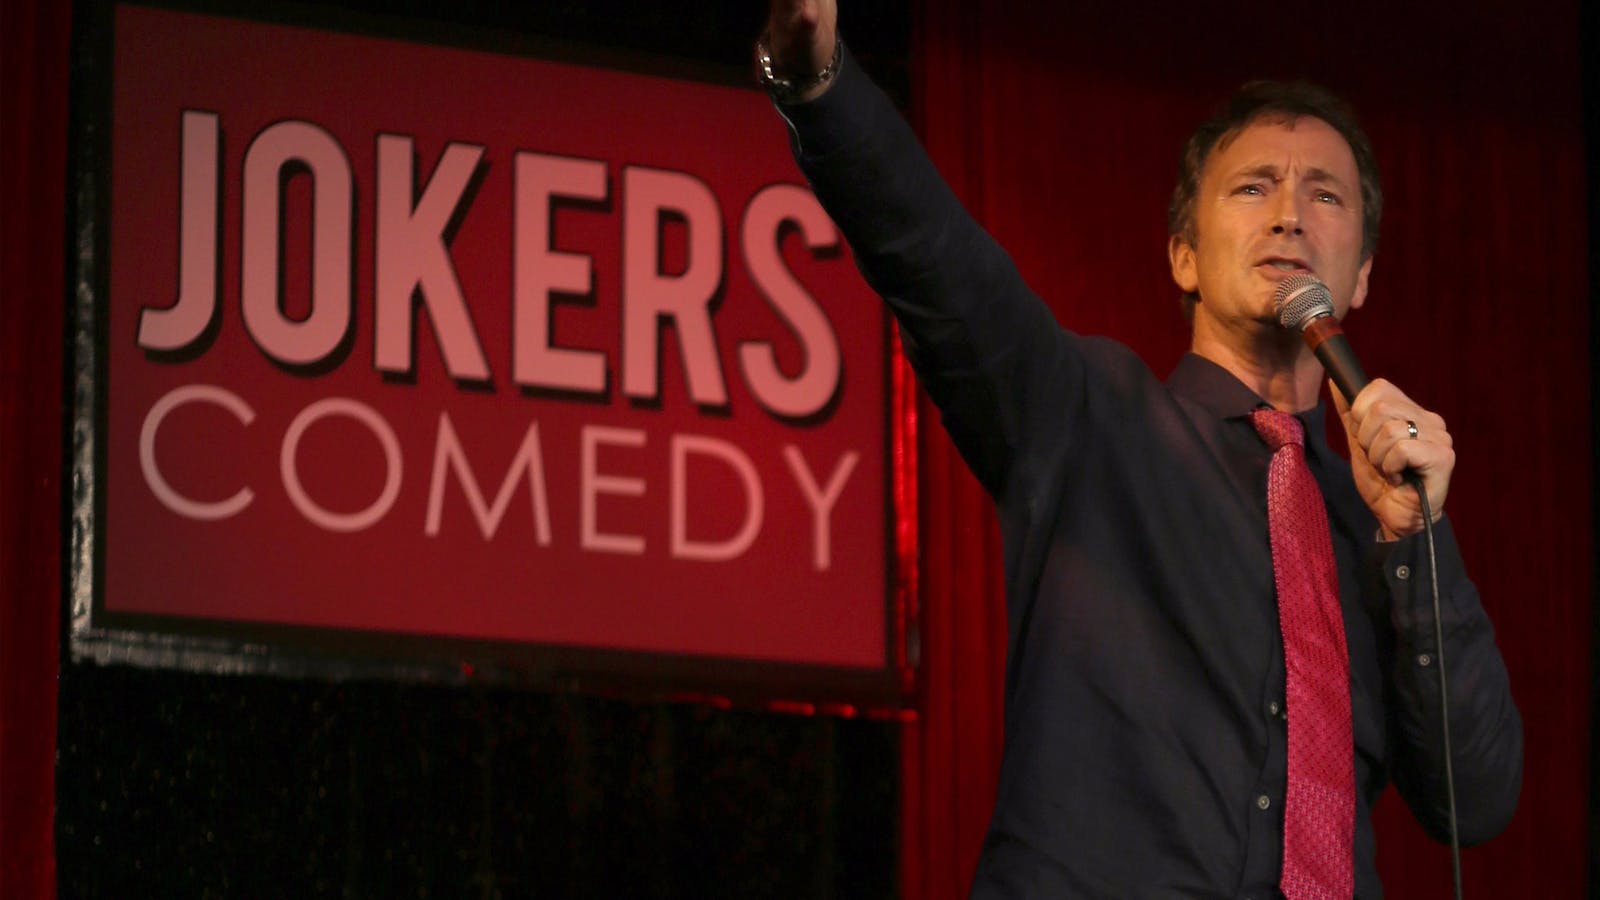 Image for Jokers Comedy Club